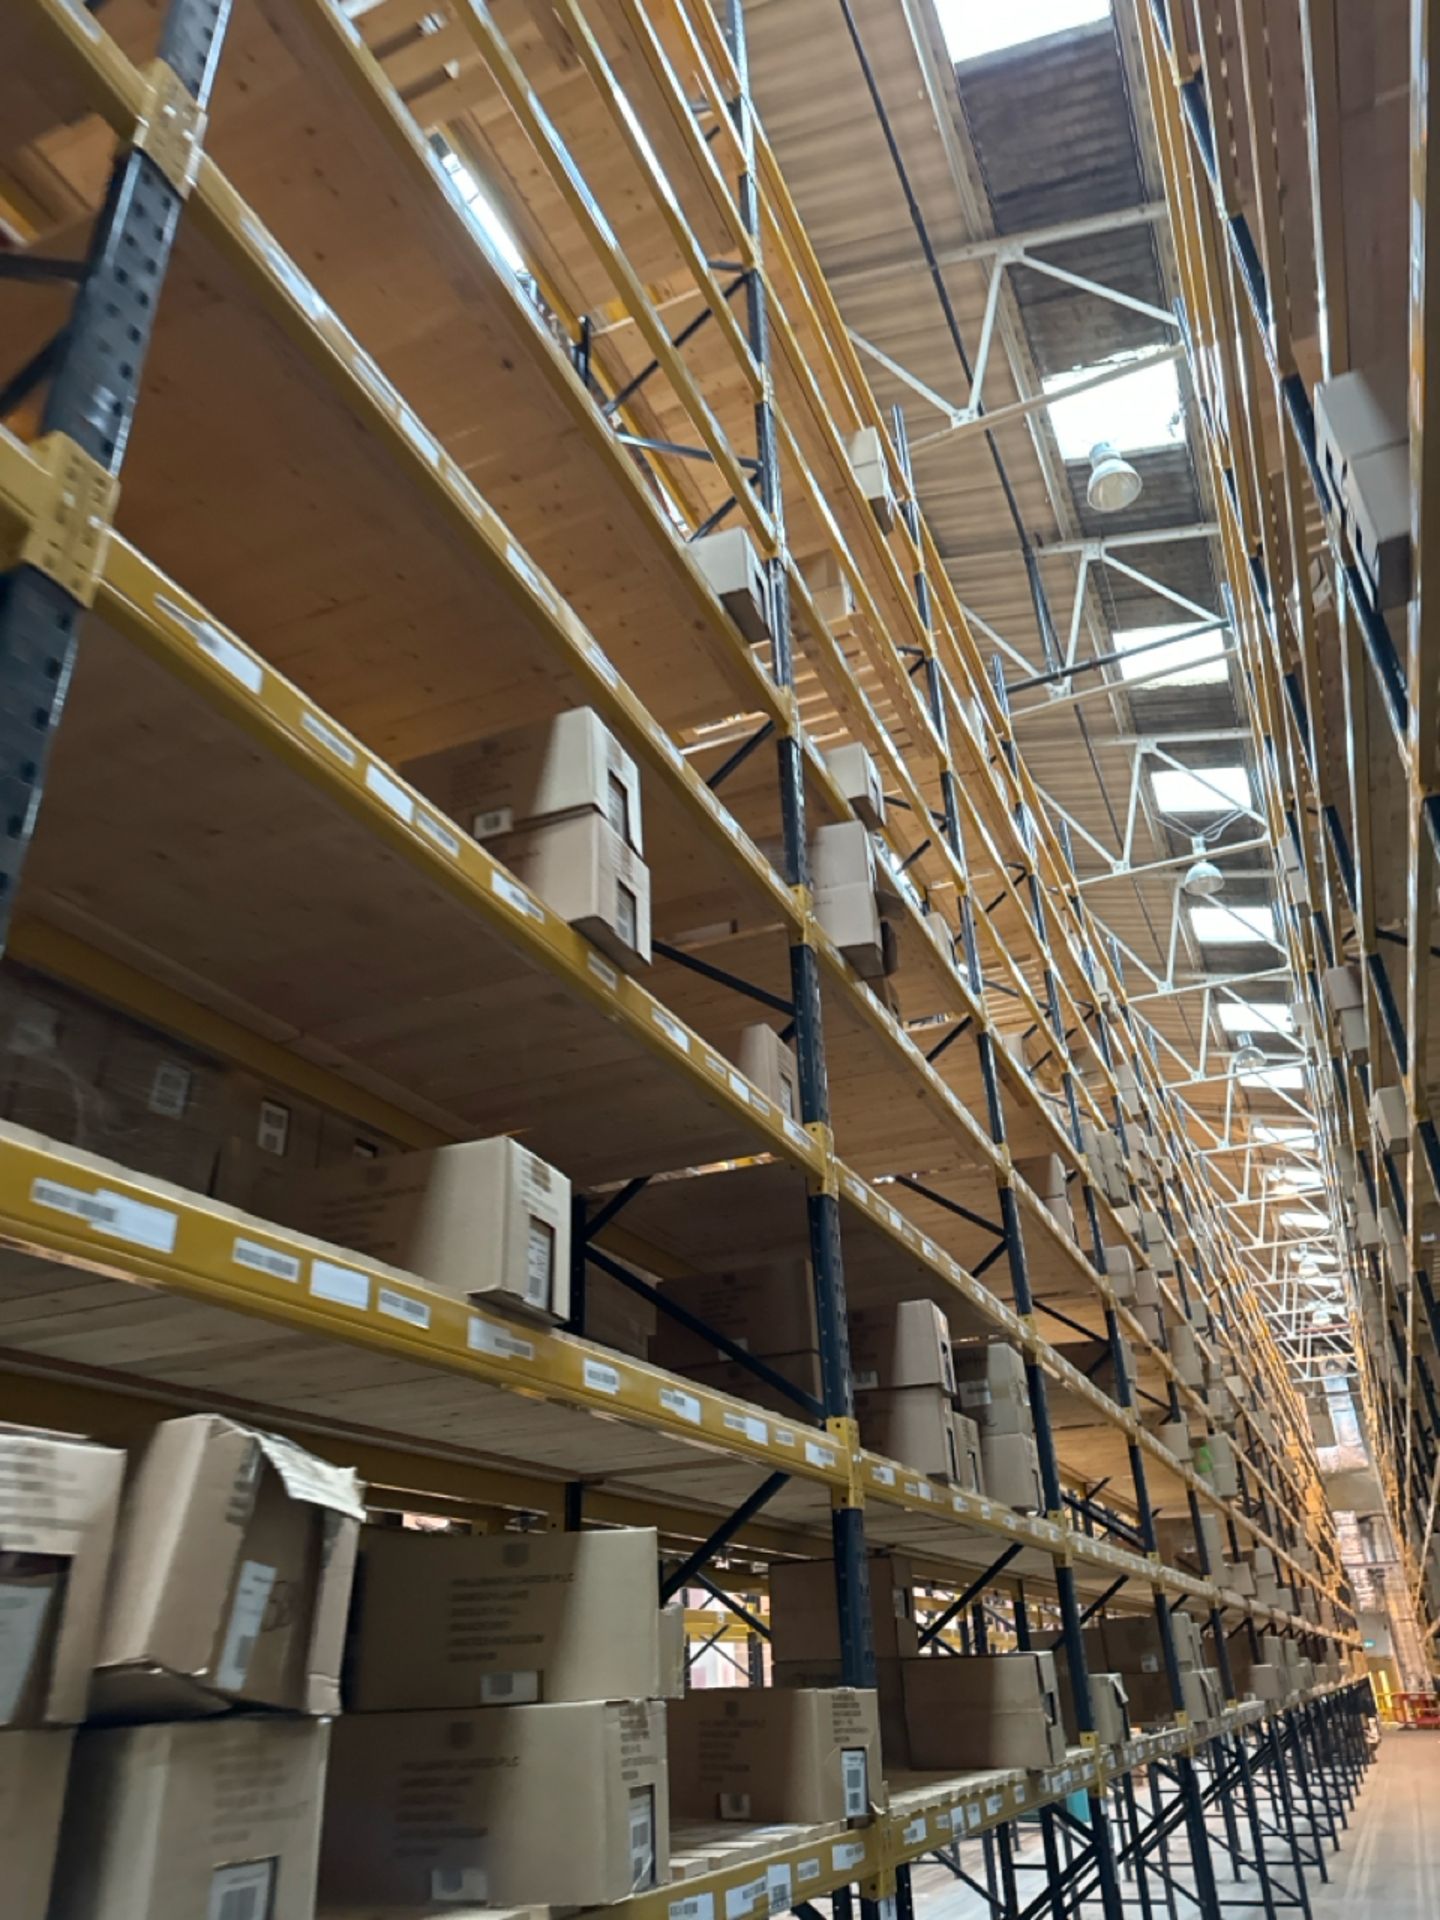 Run Of 46 Bays Of Back To Back Boltless Industrial Pallet Racking - Image 10 of 12